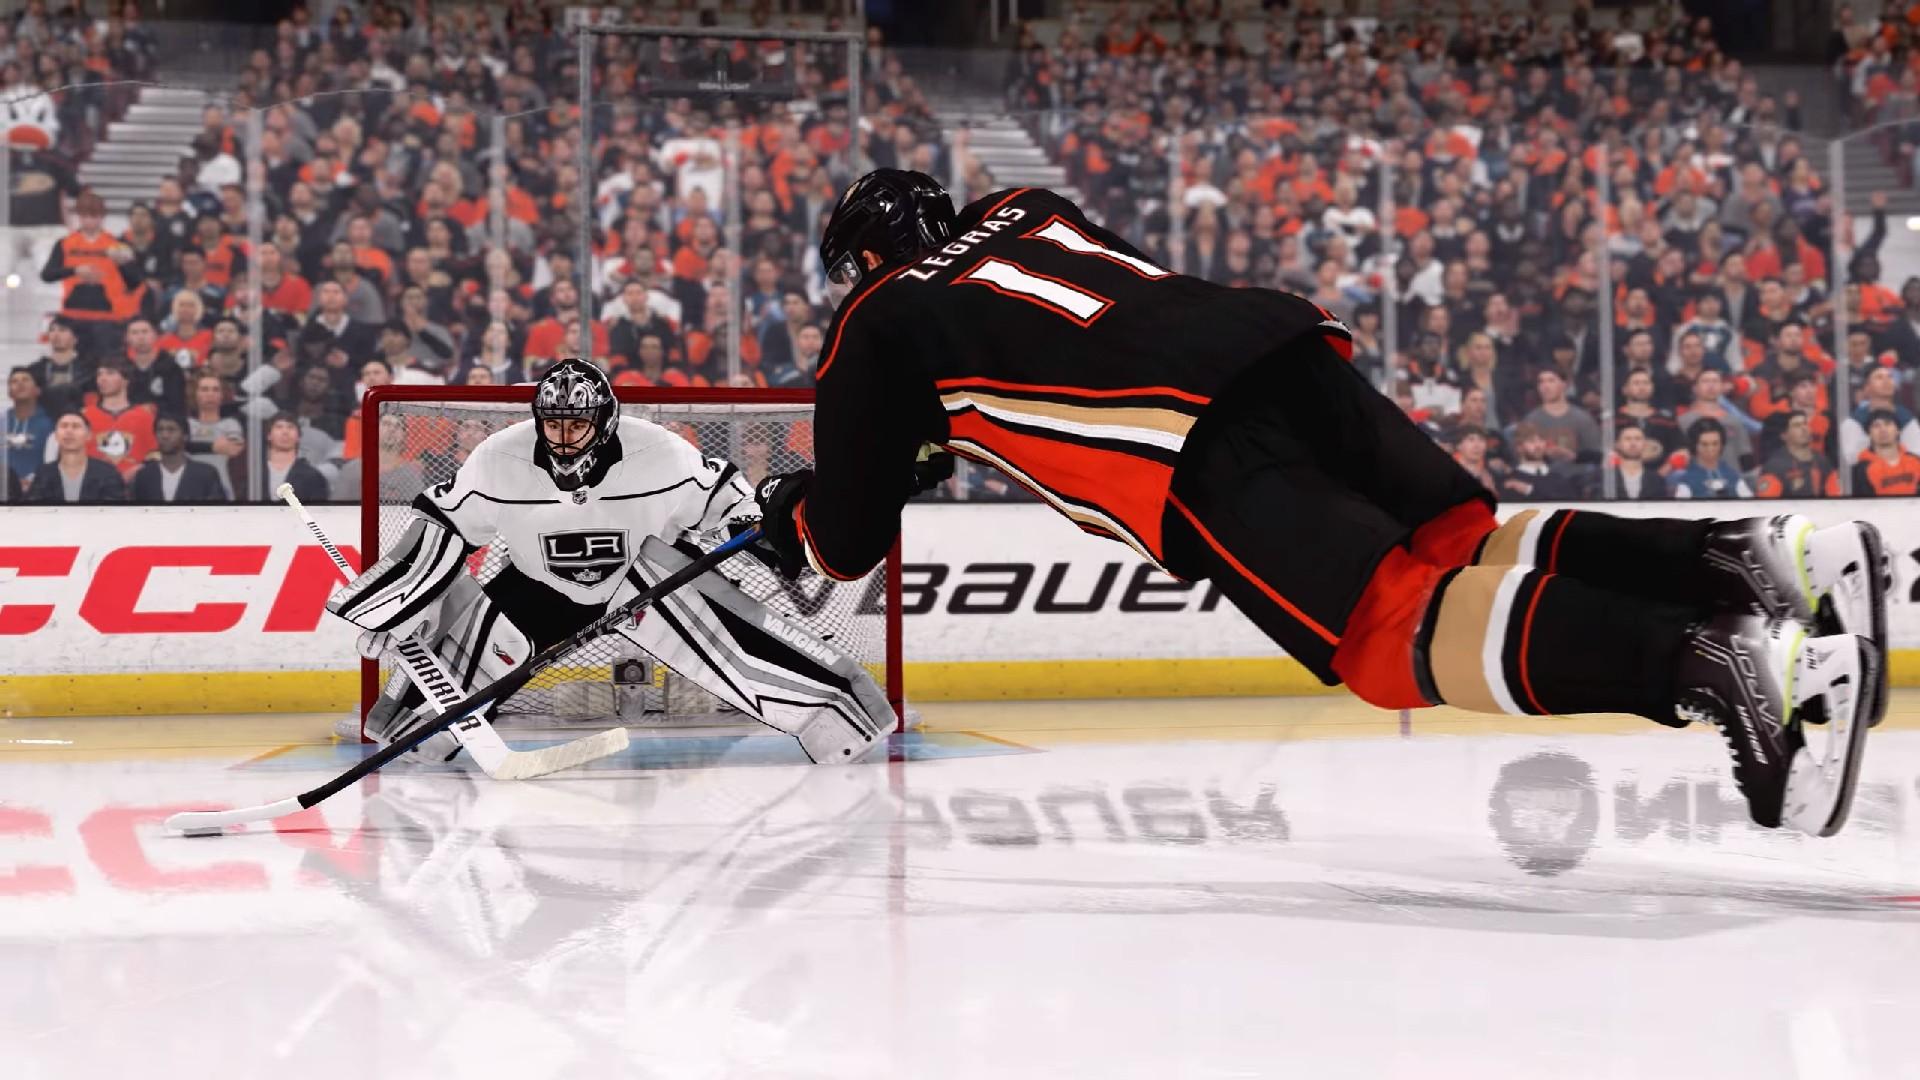 NHL 23 release date, trailer, cover star, and more